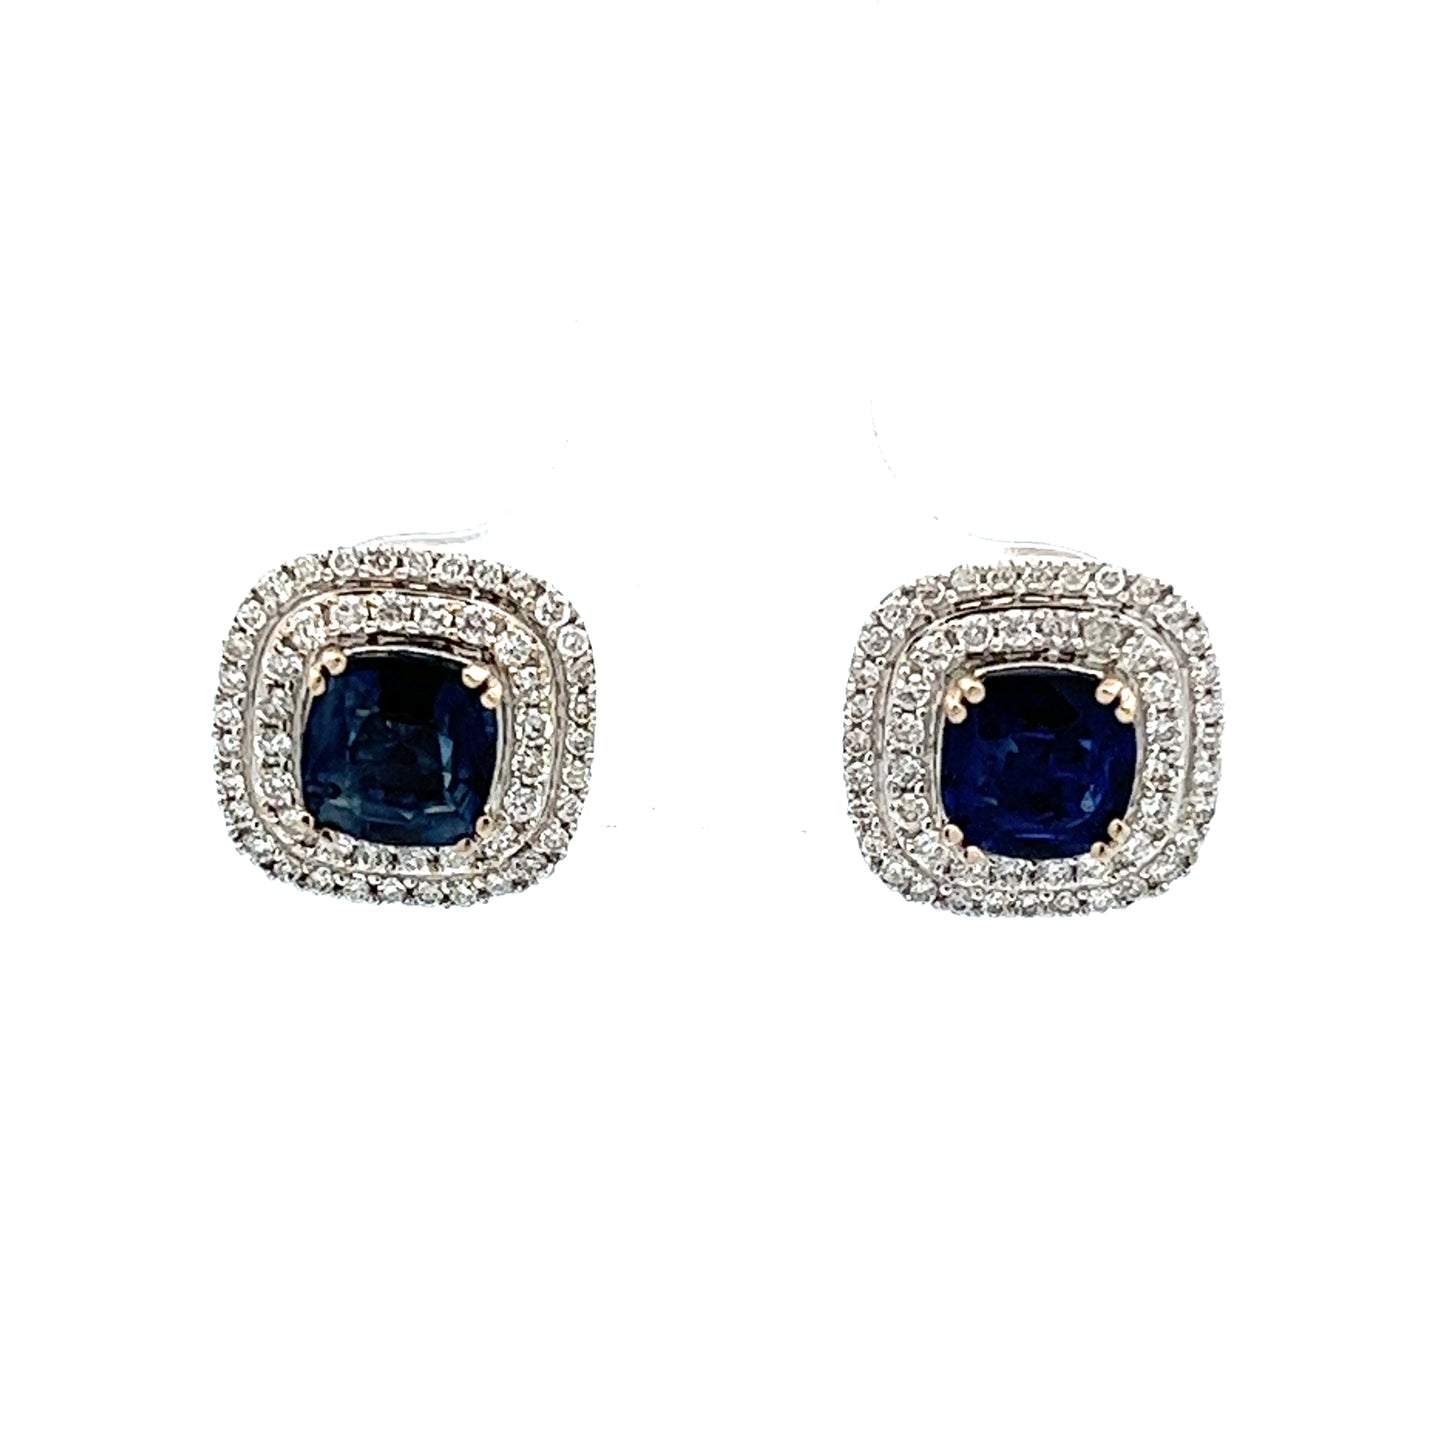 14k white gold 1ct total weight cushion cut sapphires with diamond earrings